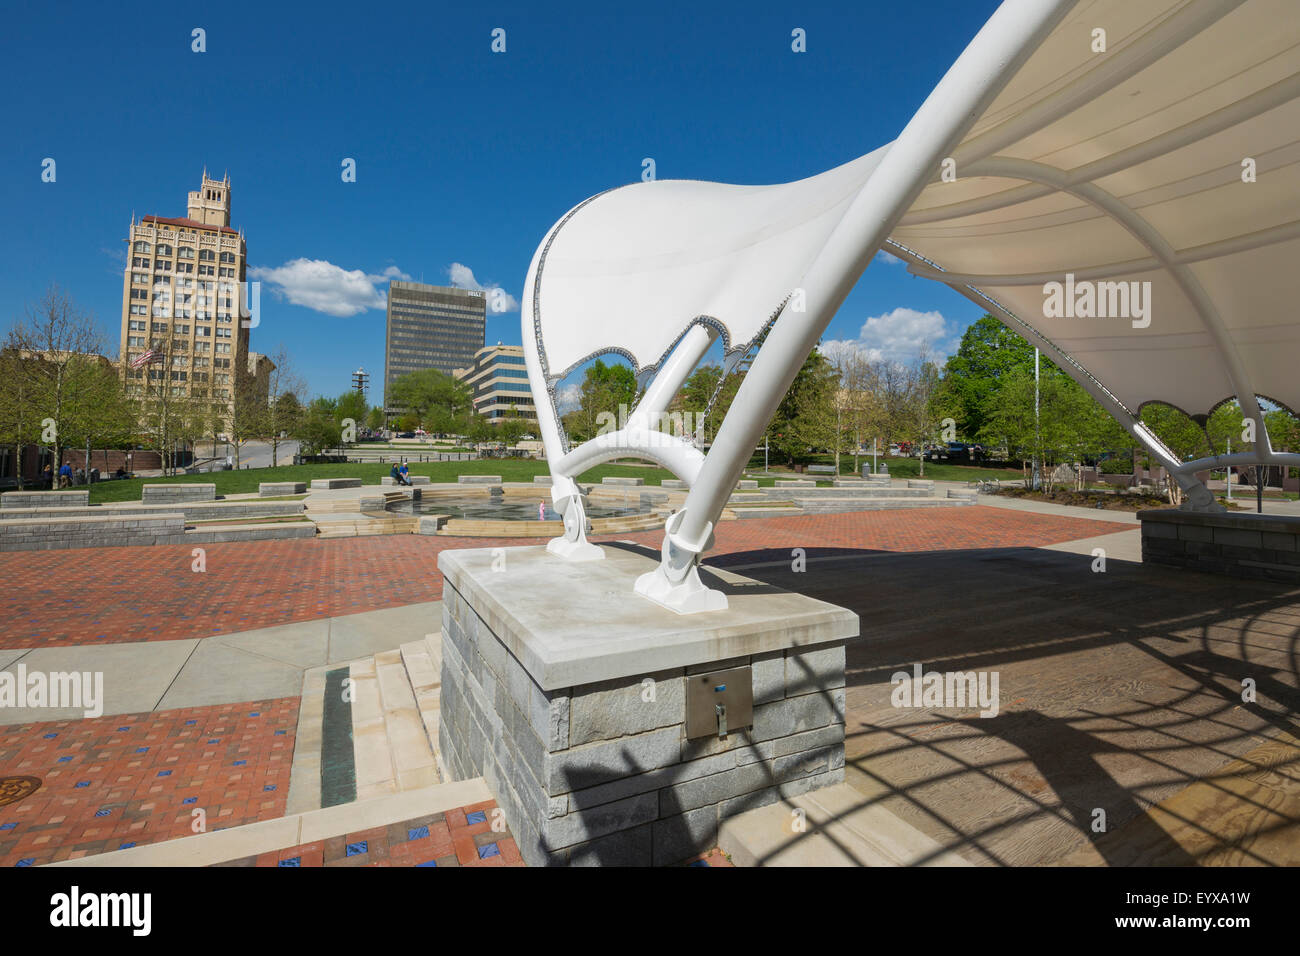 BANDSTAND PACK SQUARE PARK DOWNTOWN ASHEVILLE BUNCOMBE COUNTY North Carolina USA Foto Stock